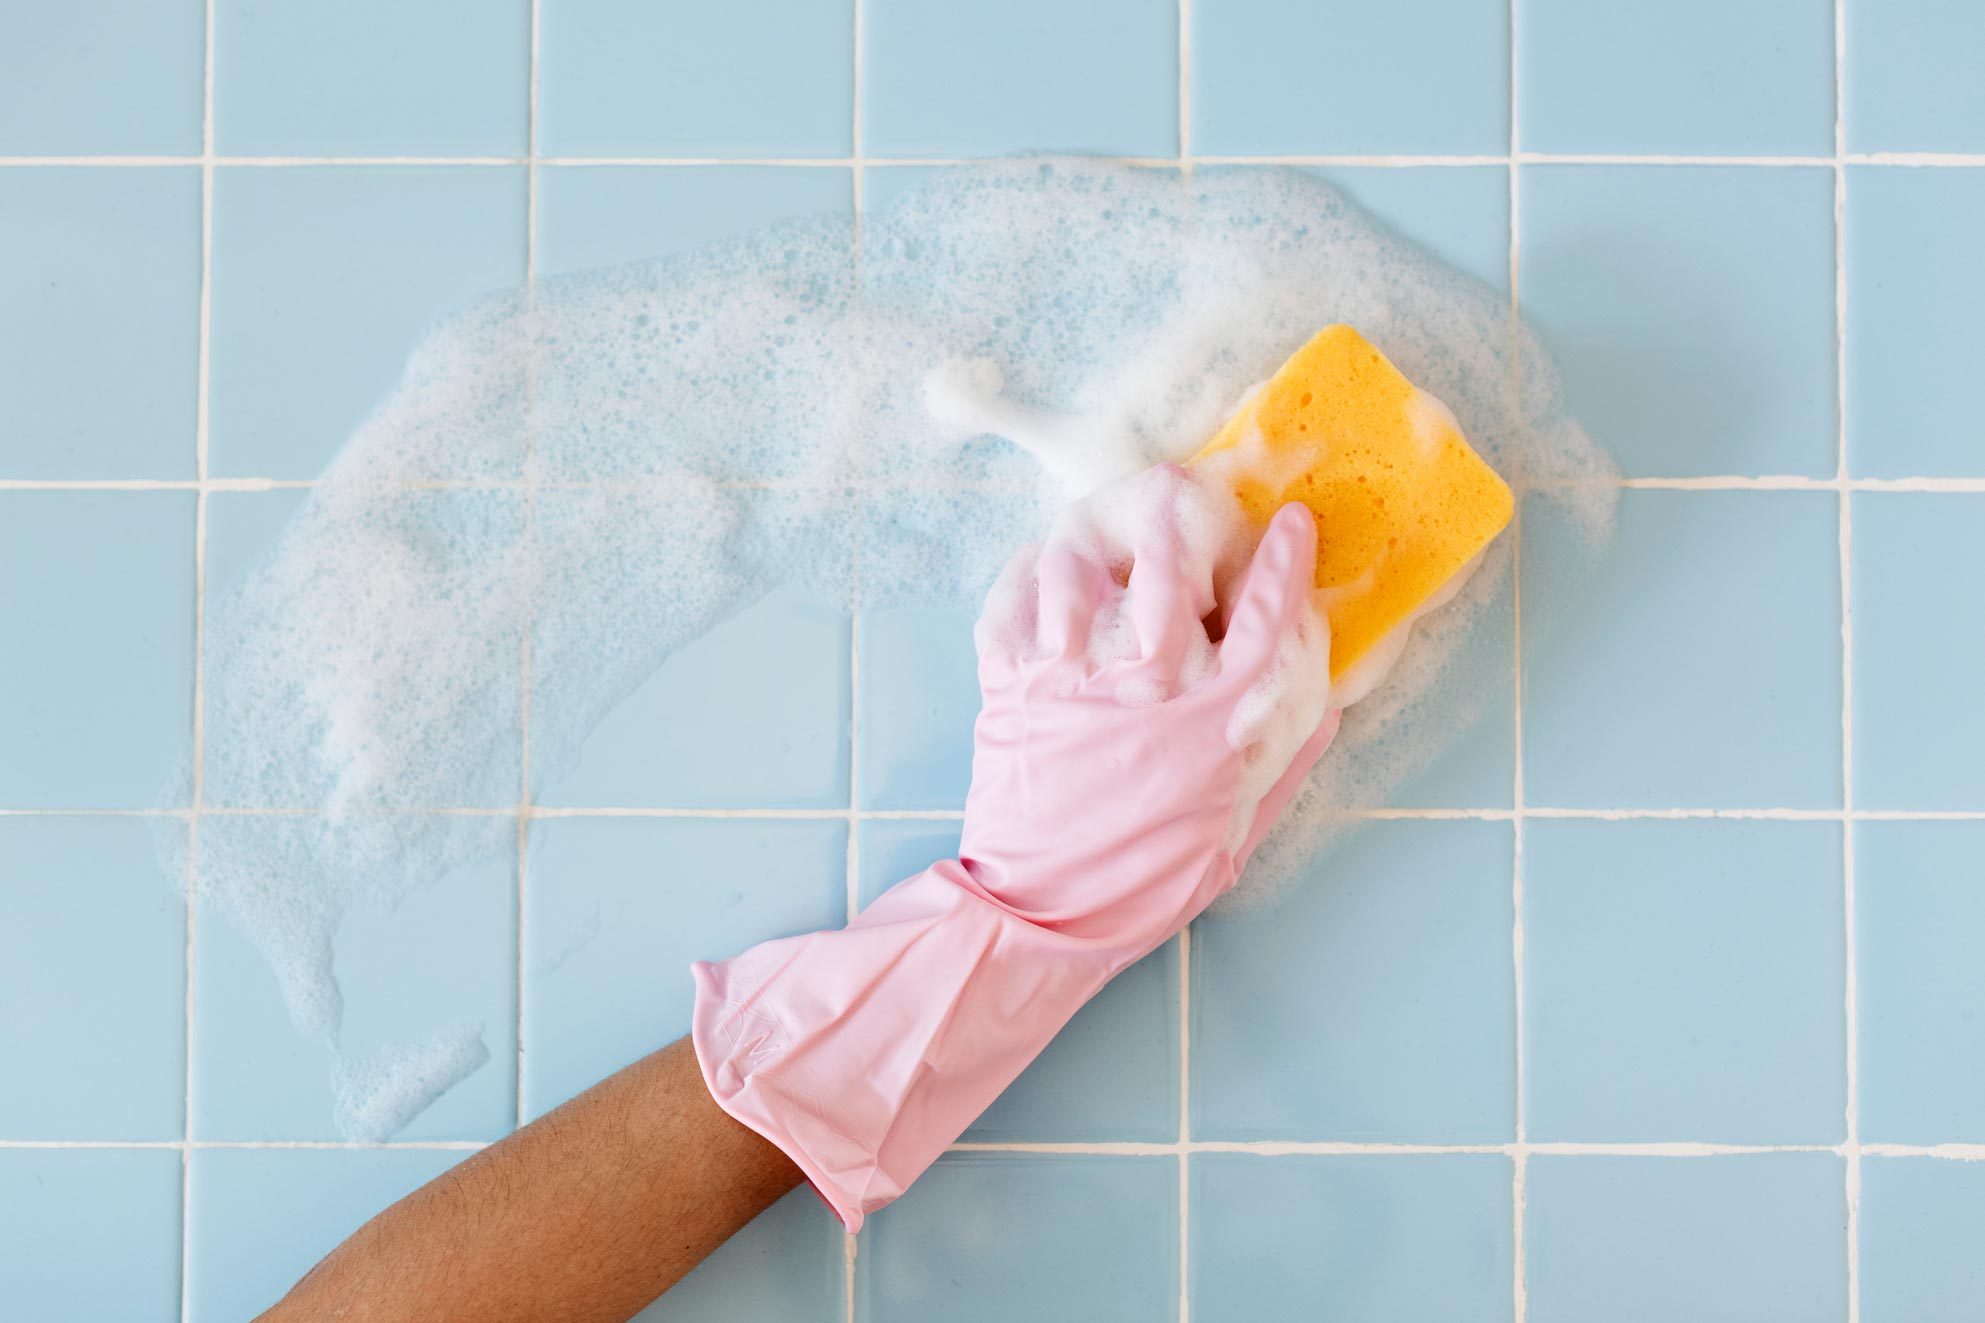 https://www.tasteofhome.com/wp-content/uploads/2022/04/how-to-clean-your-bathroom-step-by-step-GettyImages-912397166.jpg